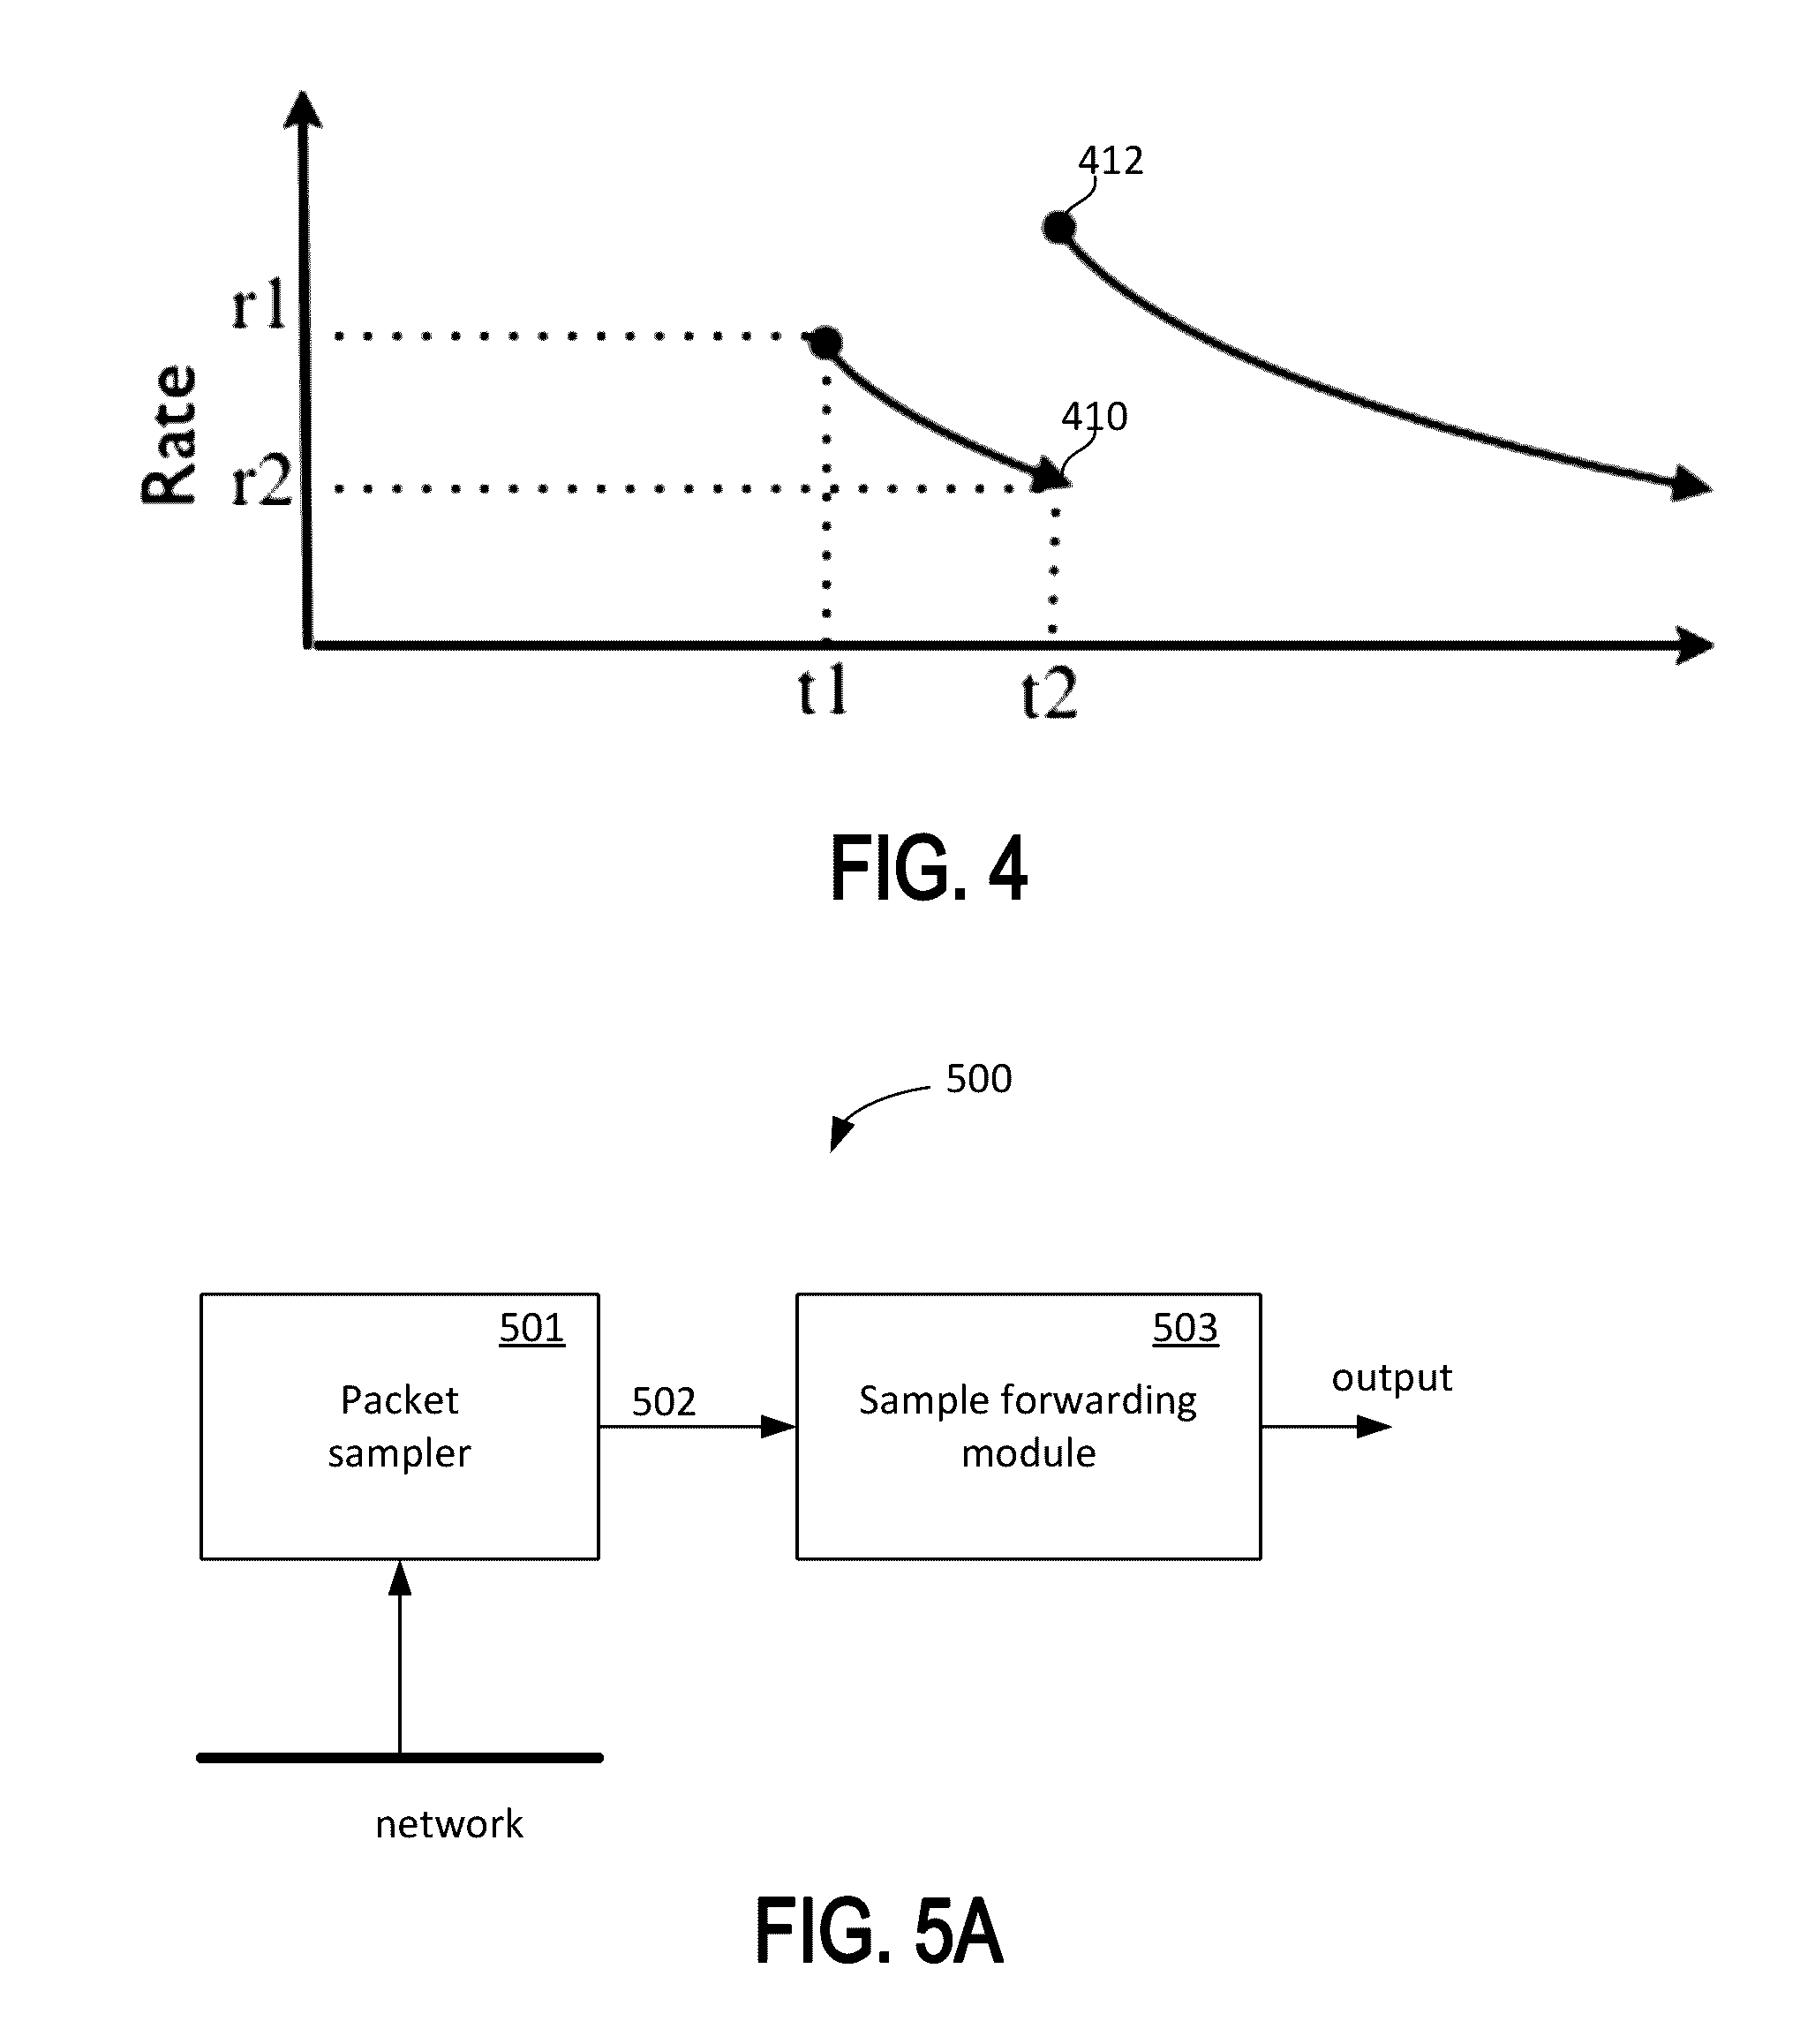 Method for asynchronous calculation of network traffic rates based on randomly sampled packets